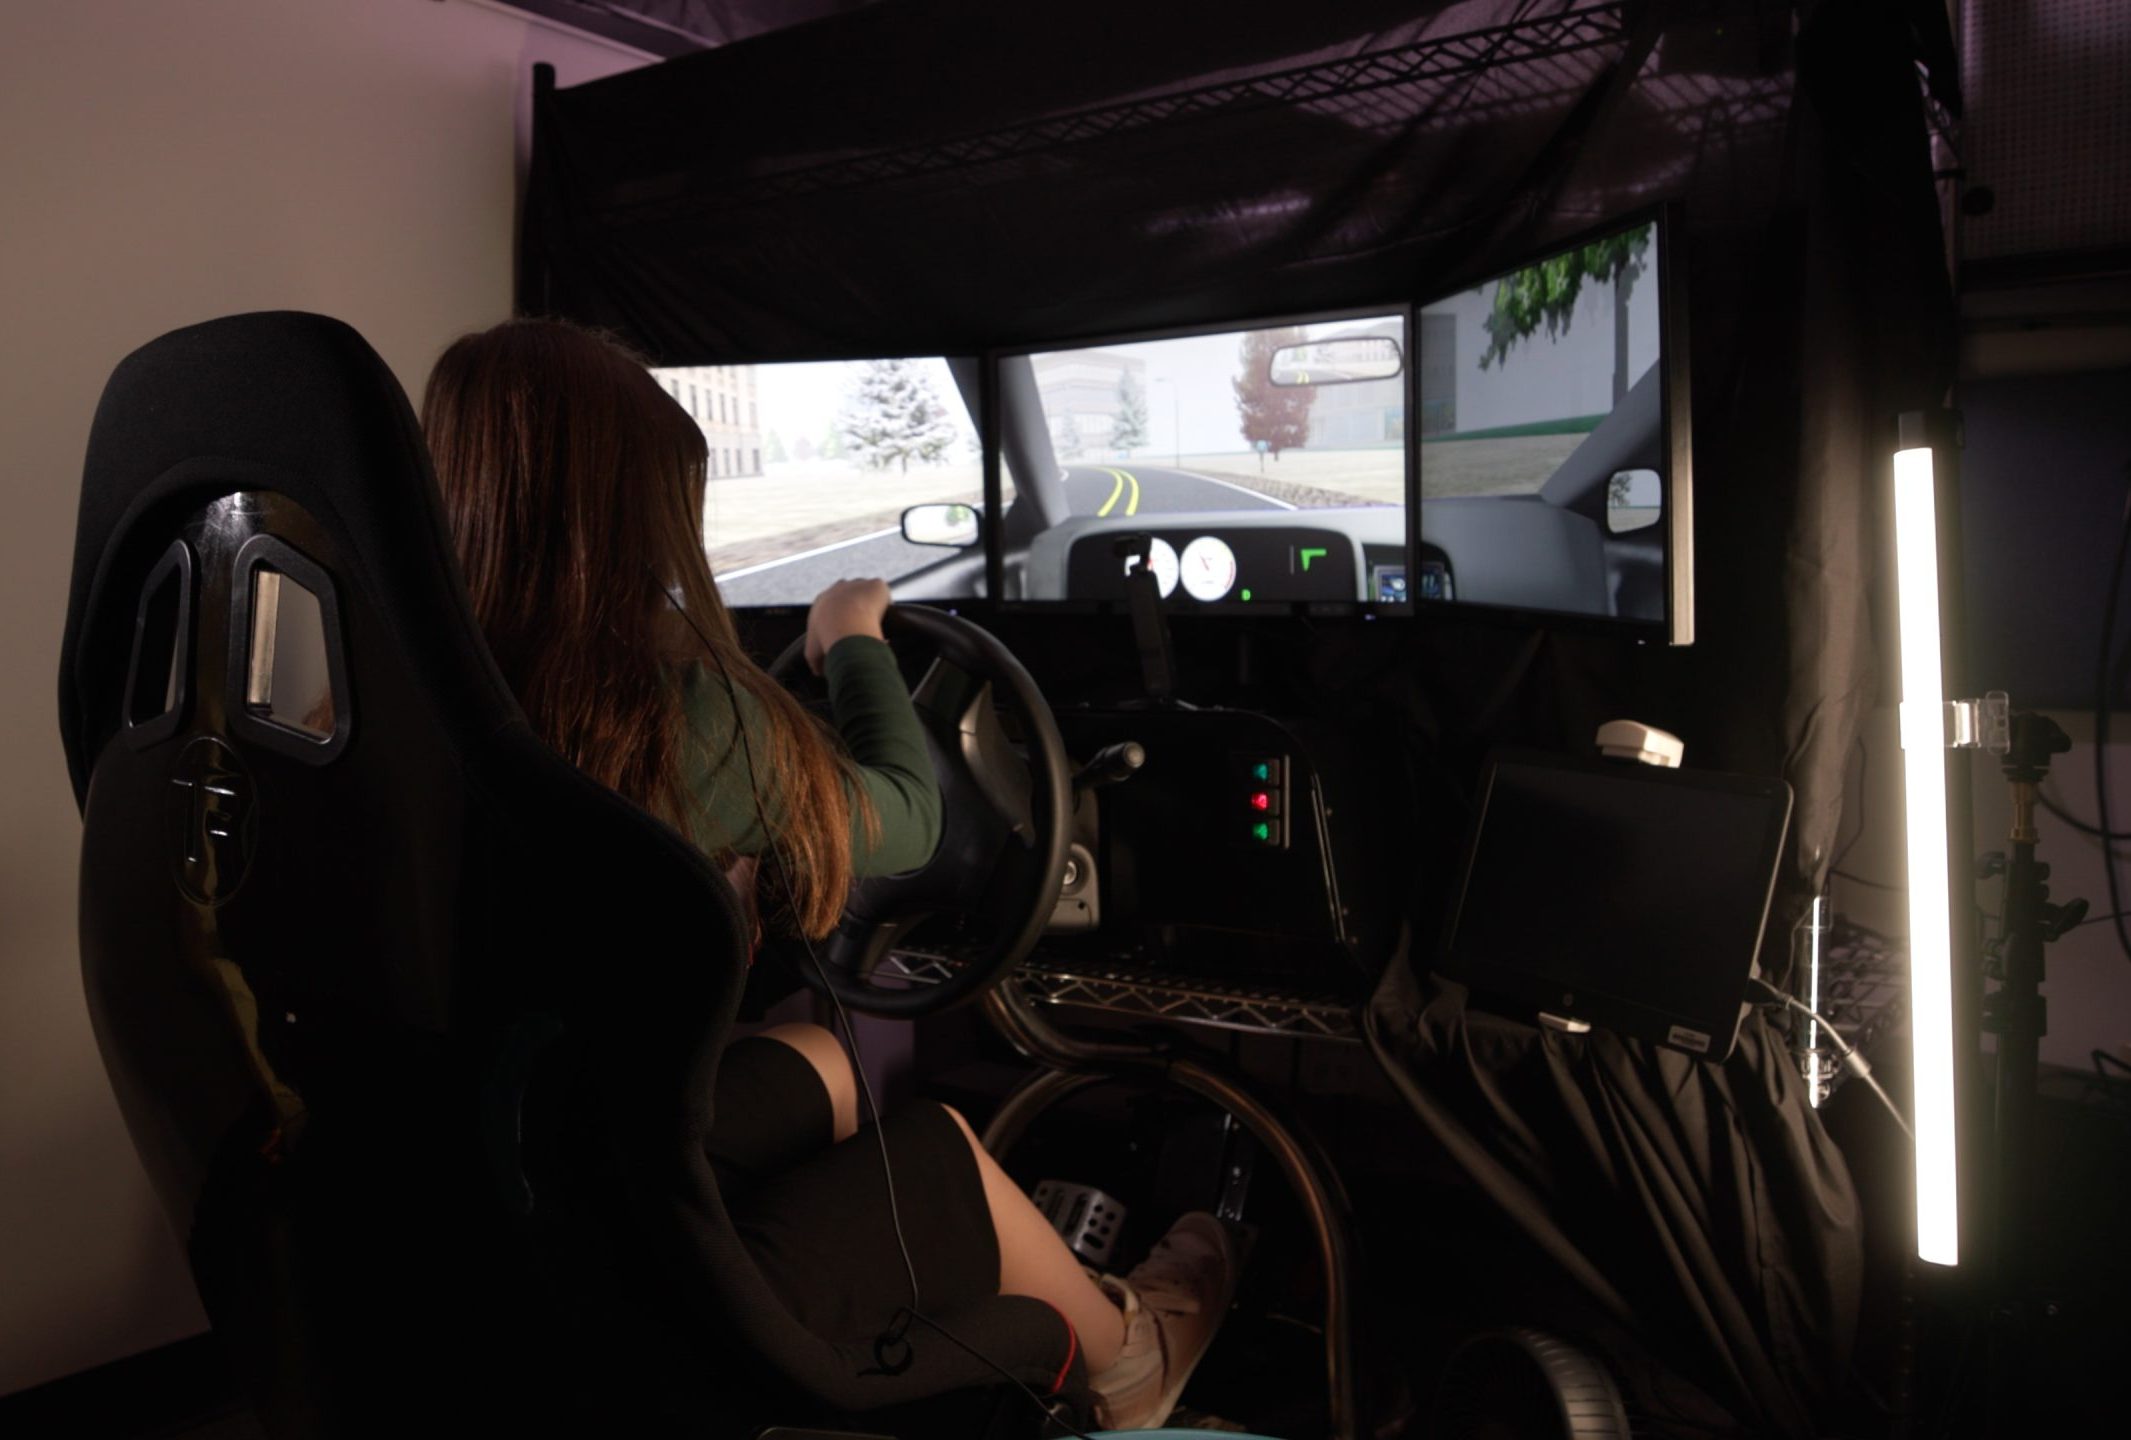 Driving simulator could help reduce car accidents for teens with ADHD